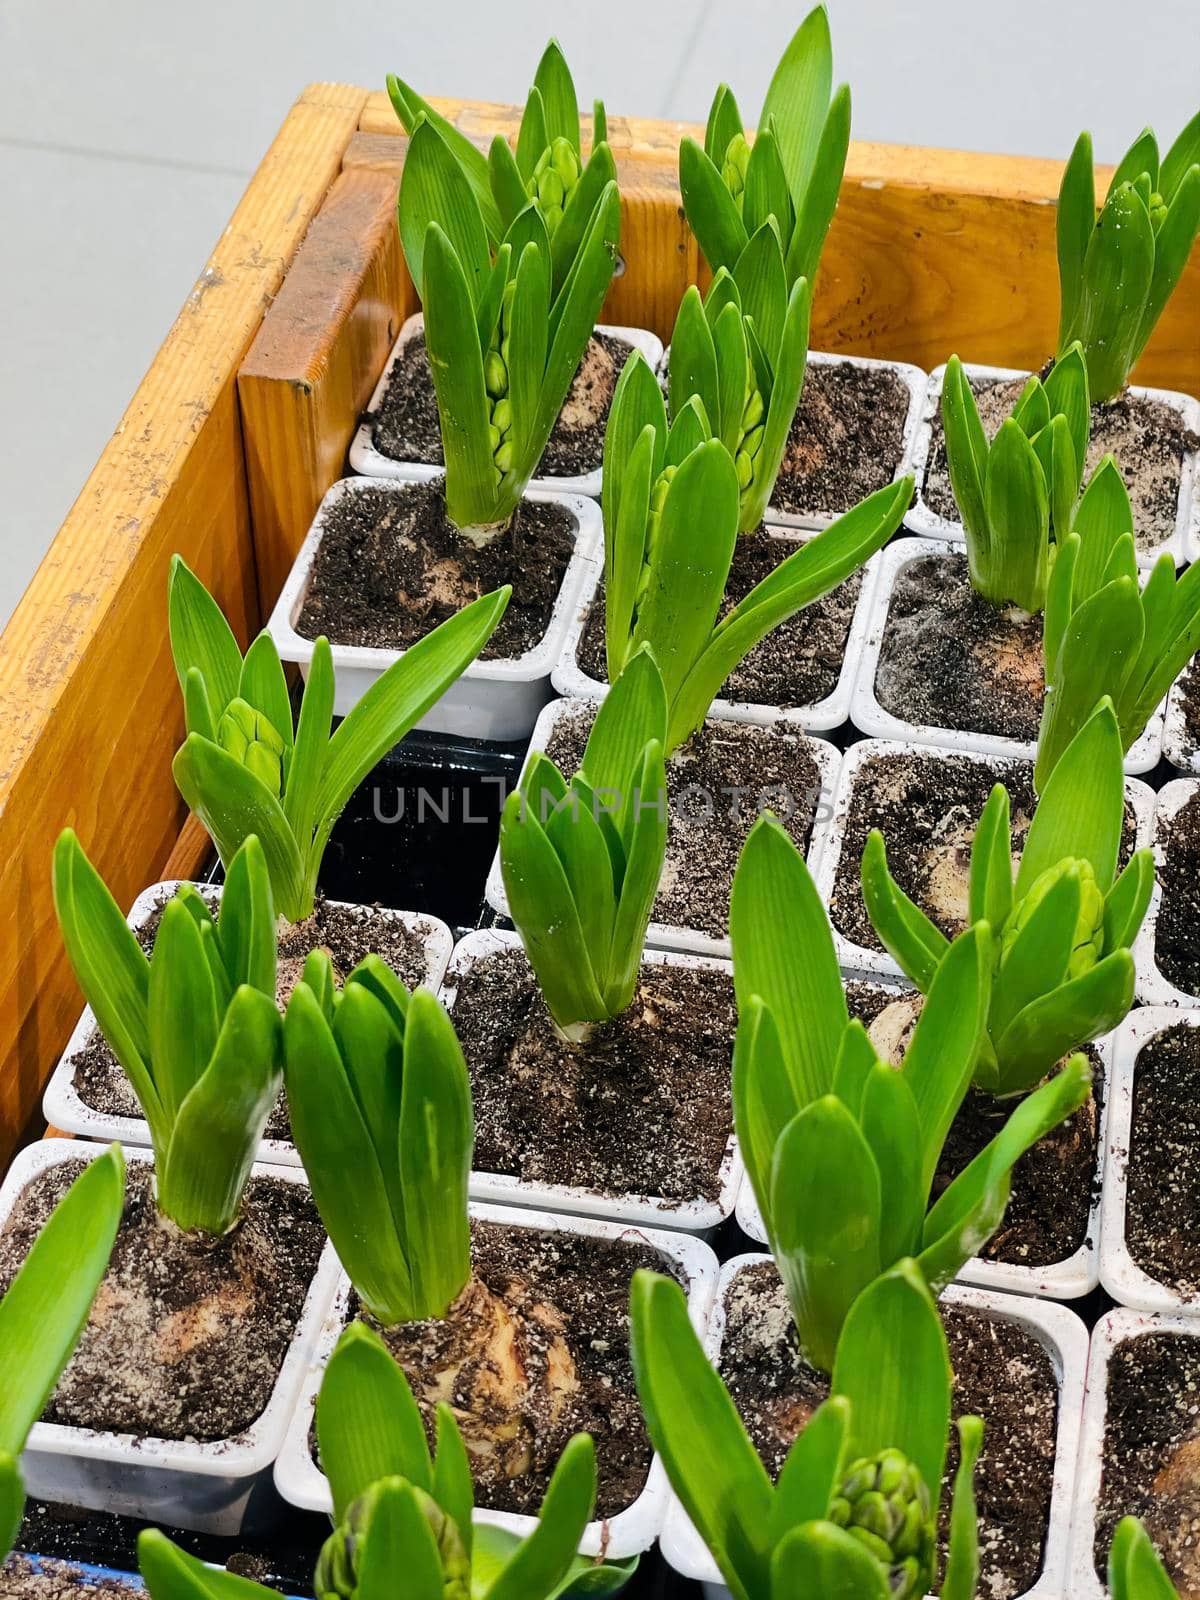 Close up of seedlings in small containers. Hyacinth saplings in plastic trays. Concept of gardening